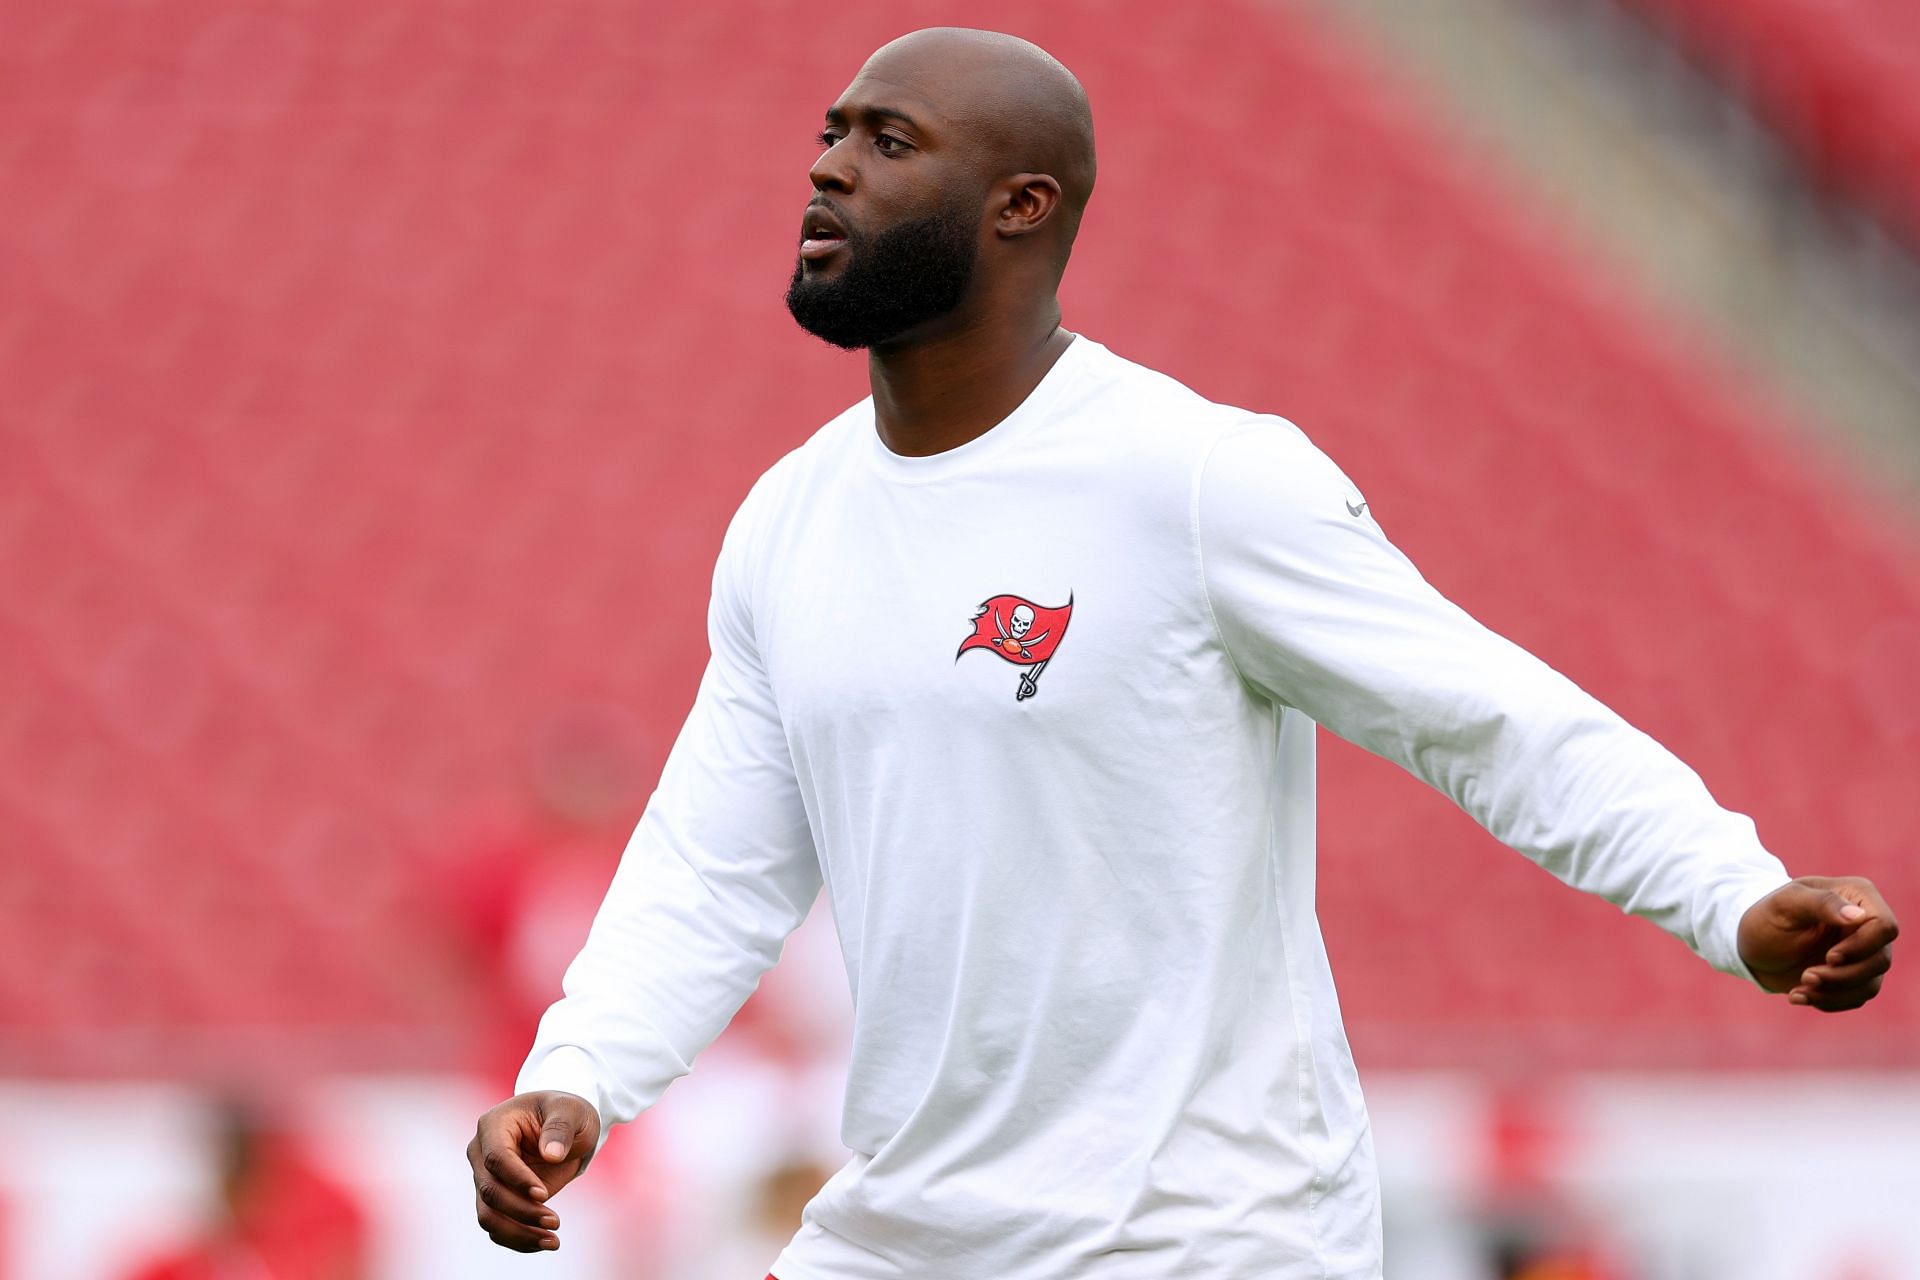 With Leonard Fournette gone, the Bucs will want a proven replacement